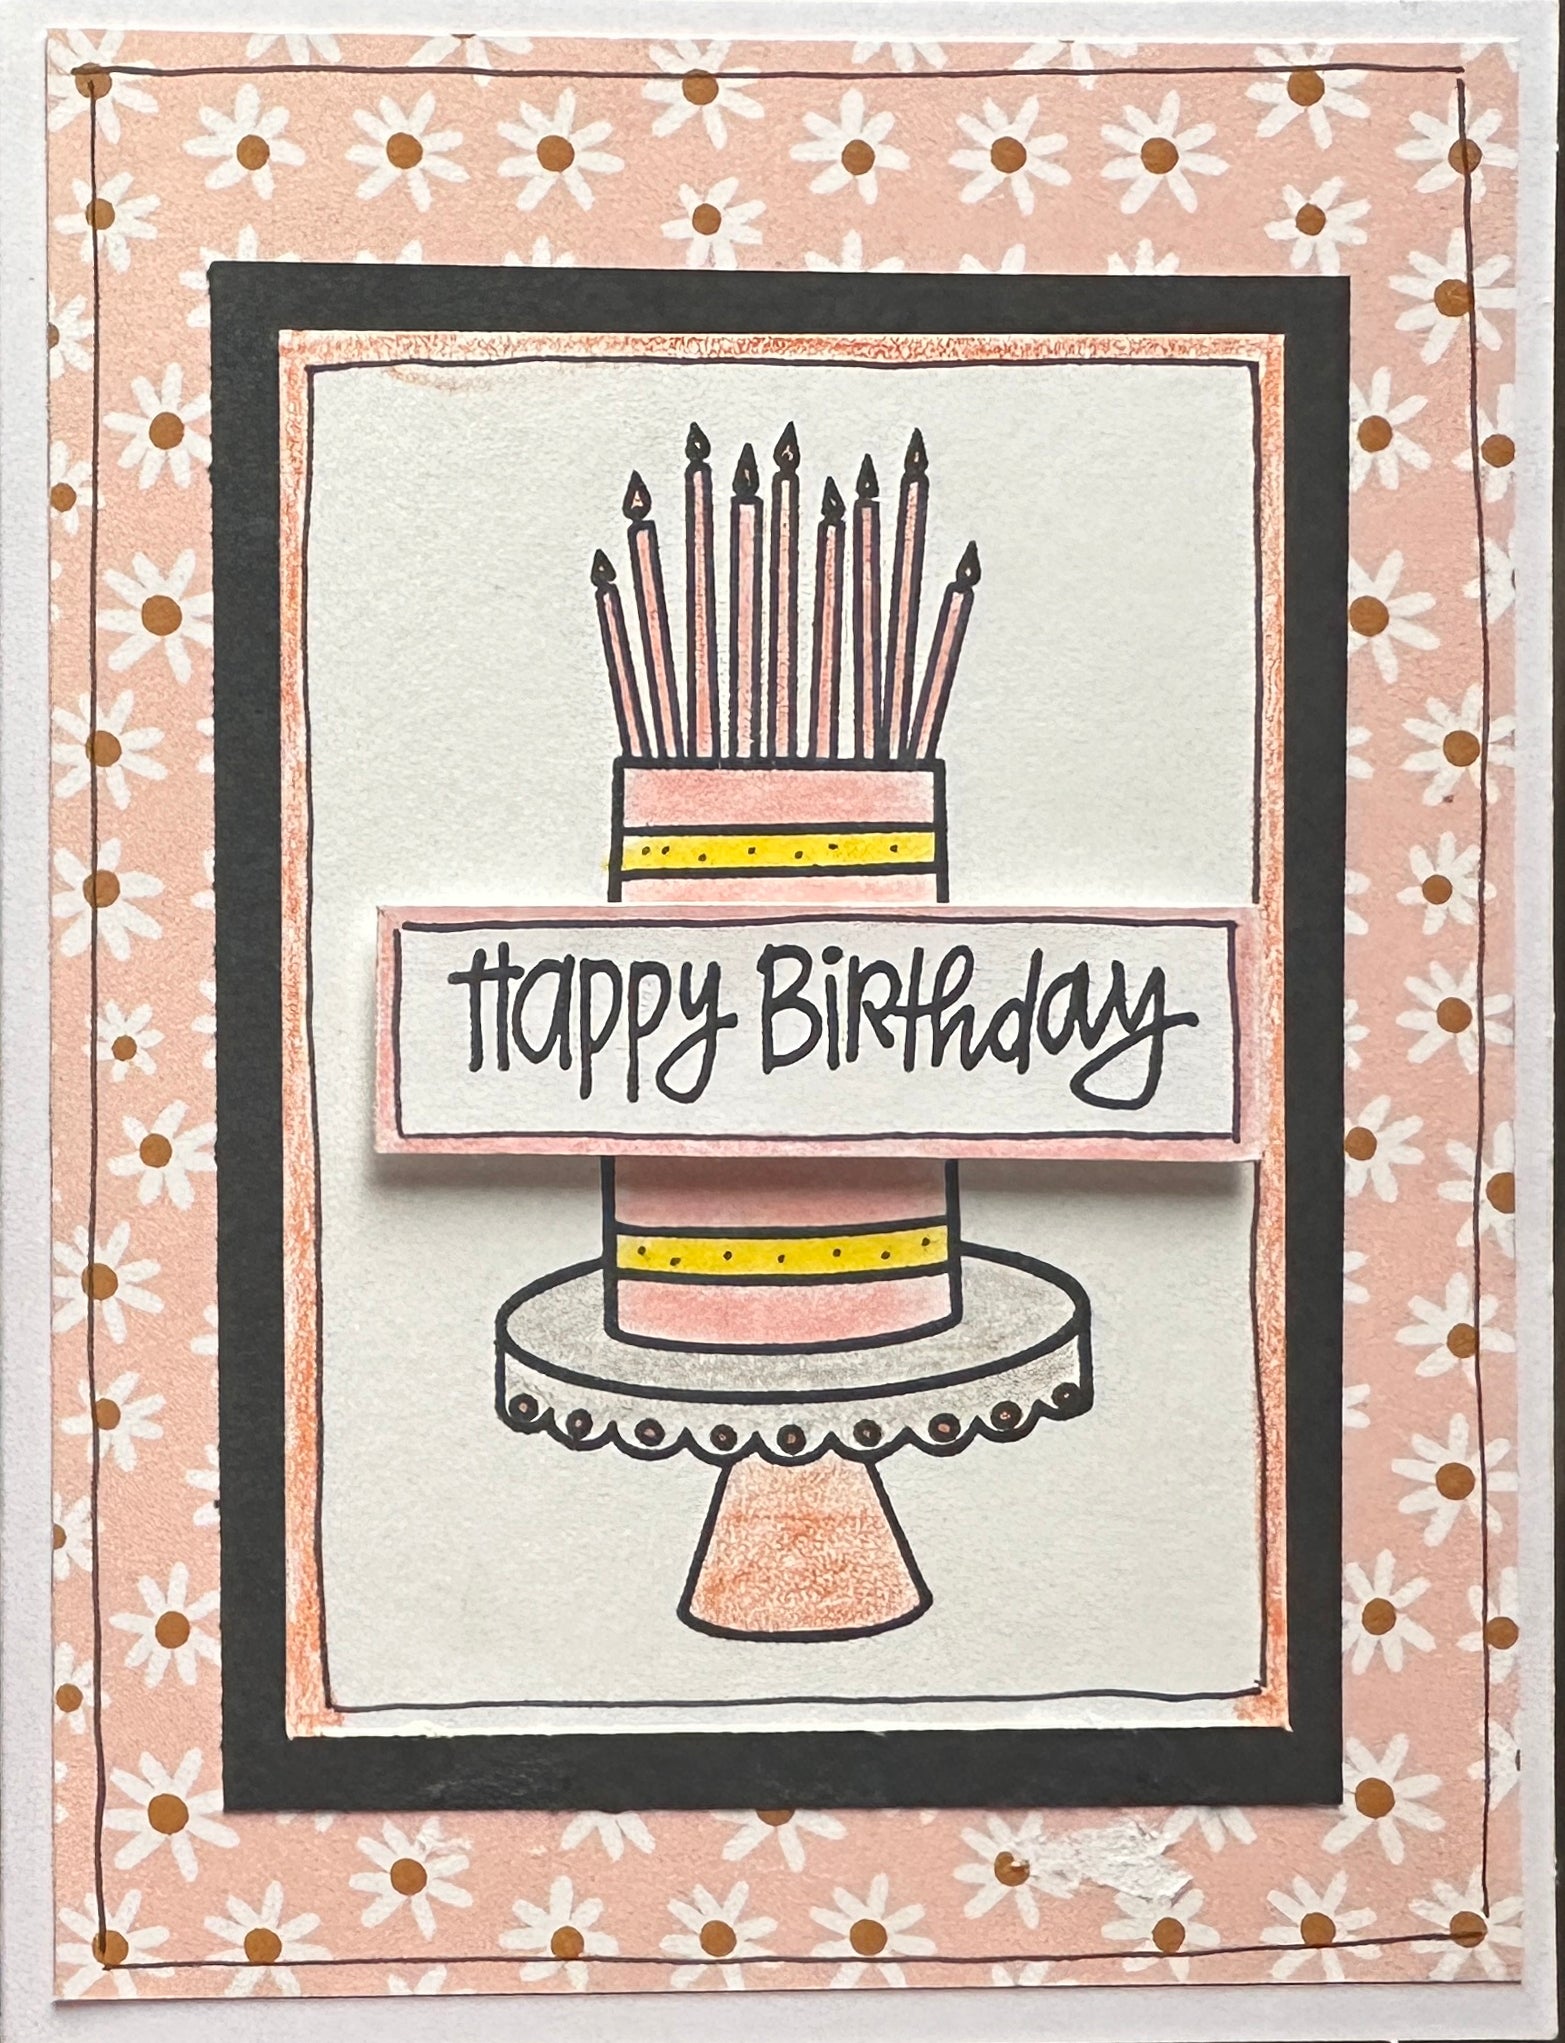 Swatch This - Pens & Pencils 3x4 Stamp Set – Layle By Mail